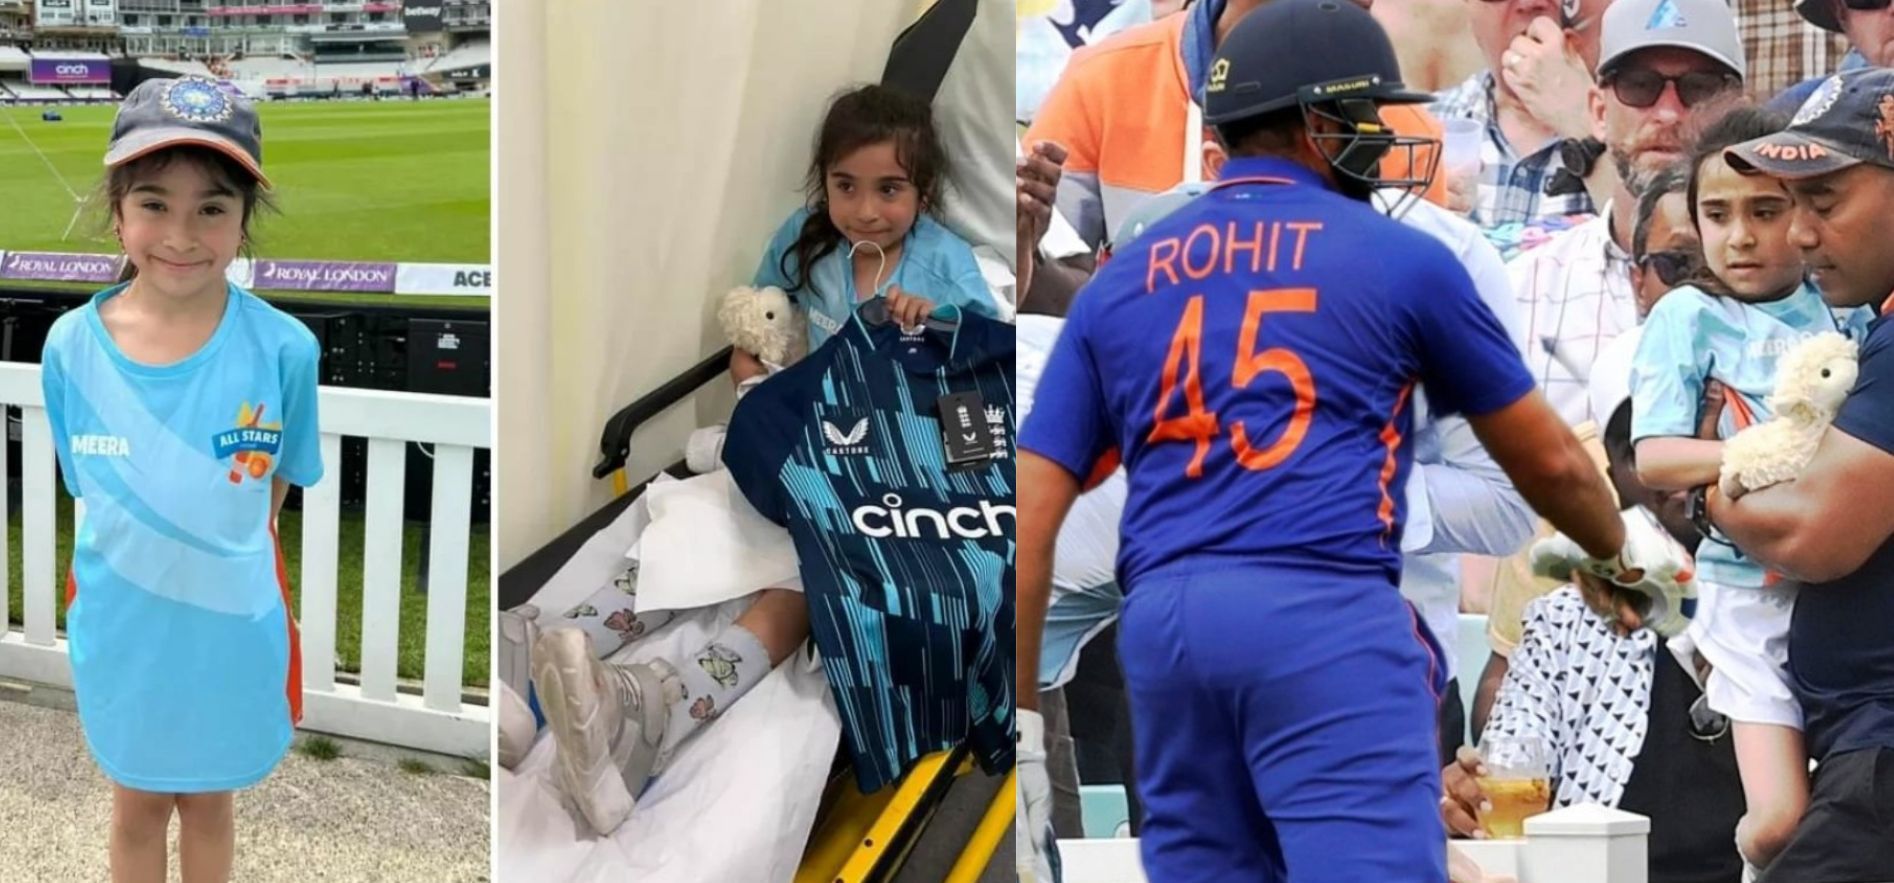 (Left) Meera Salvi was gifted a jersey by the England team. Pic: ROHIT Era/Twitter. (Right) Rohit meets Meera. Pic: cricketfan__/Twitter